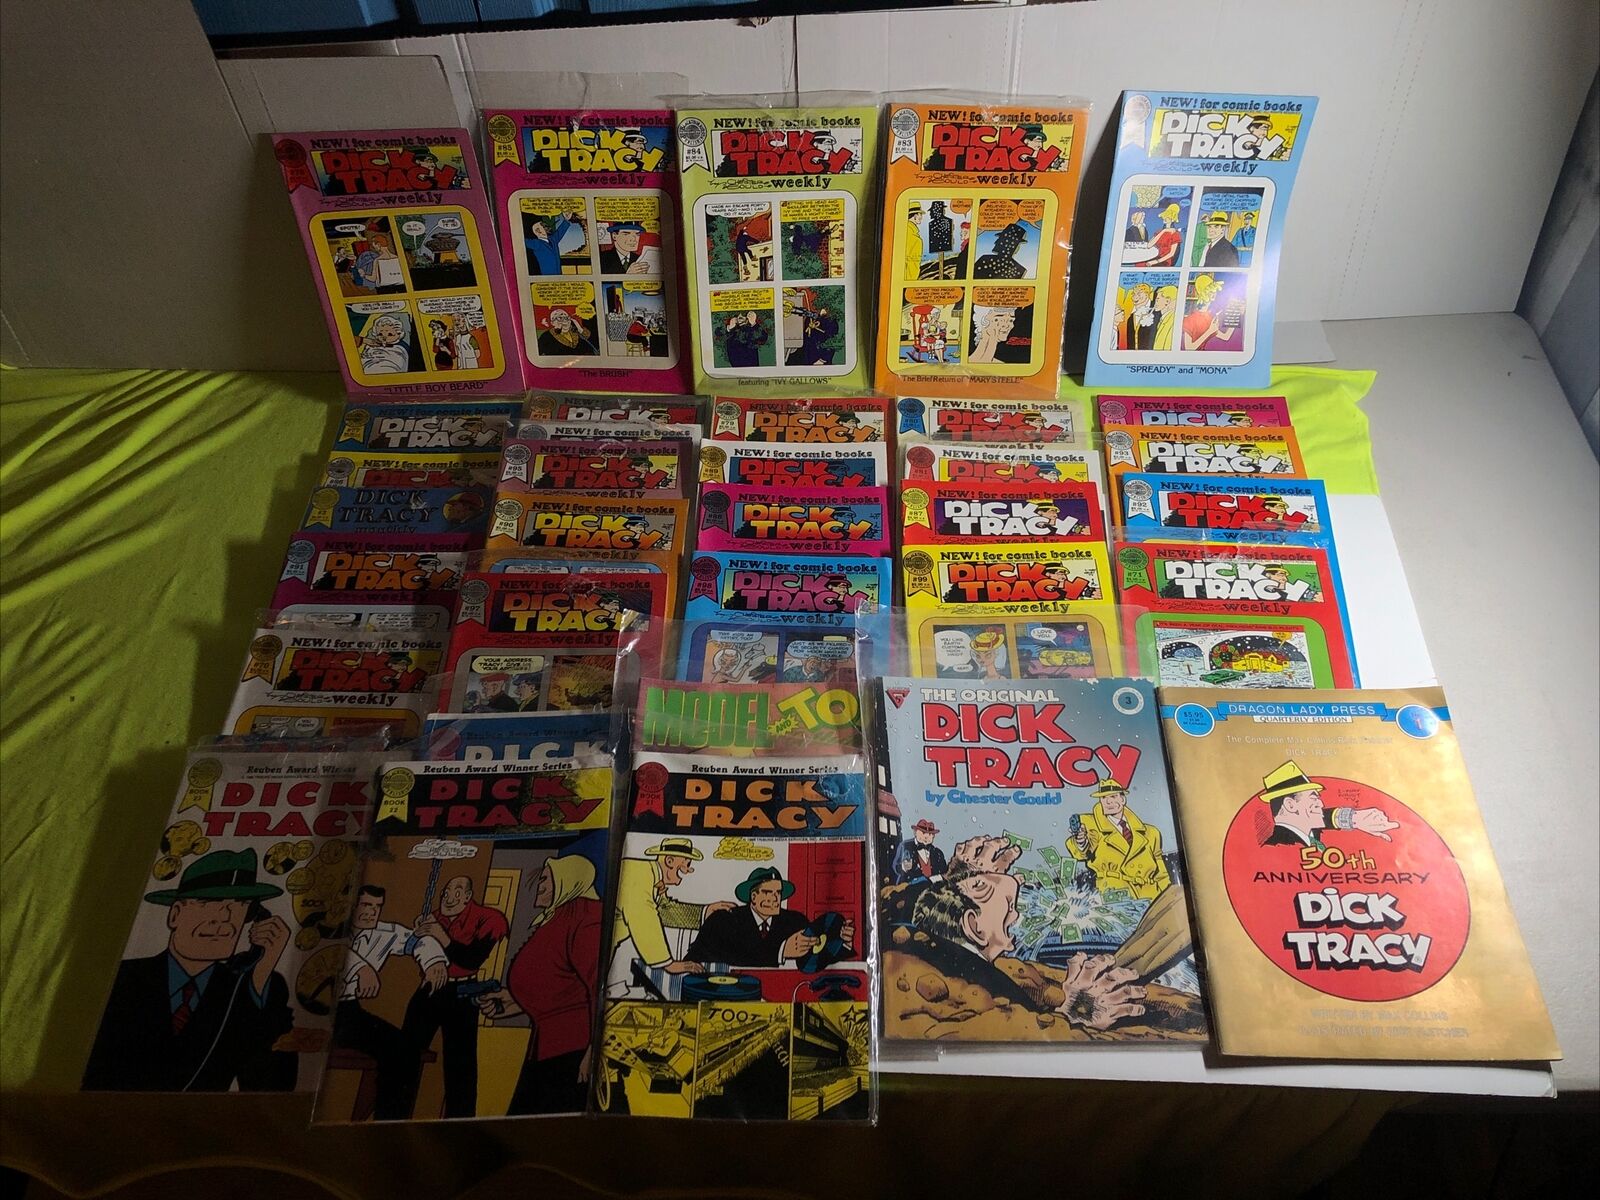 35 Mixed Lot of Dick Tracy Weekly Comic Books And Books